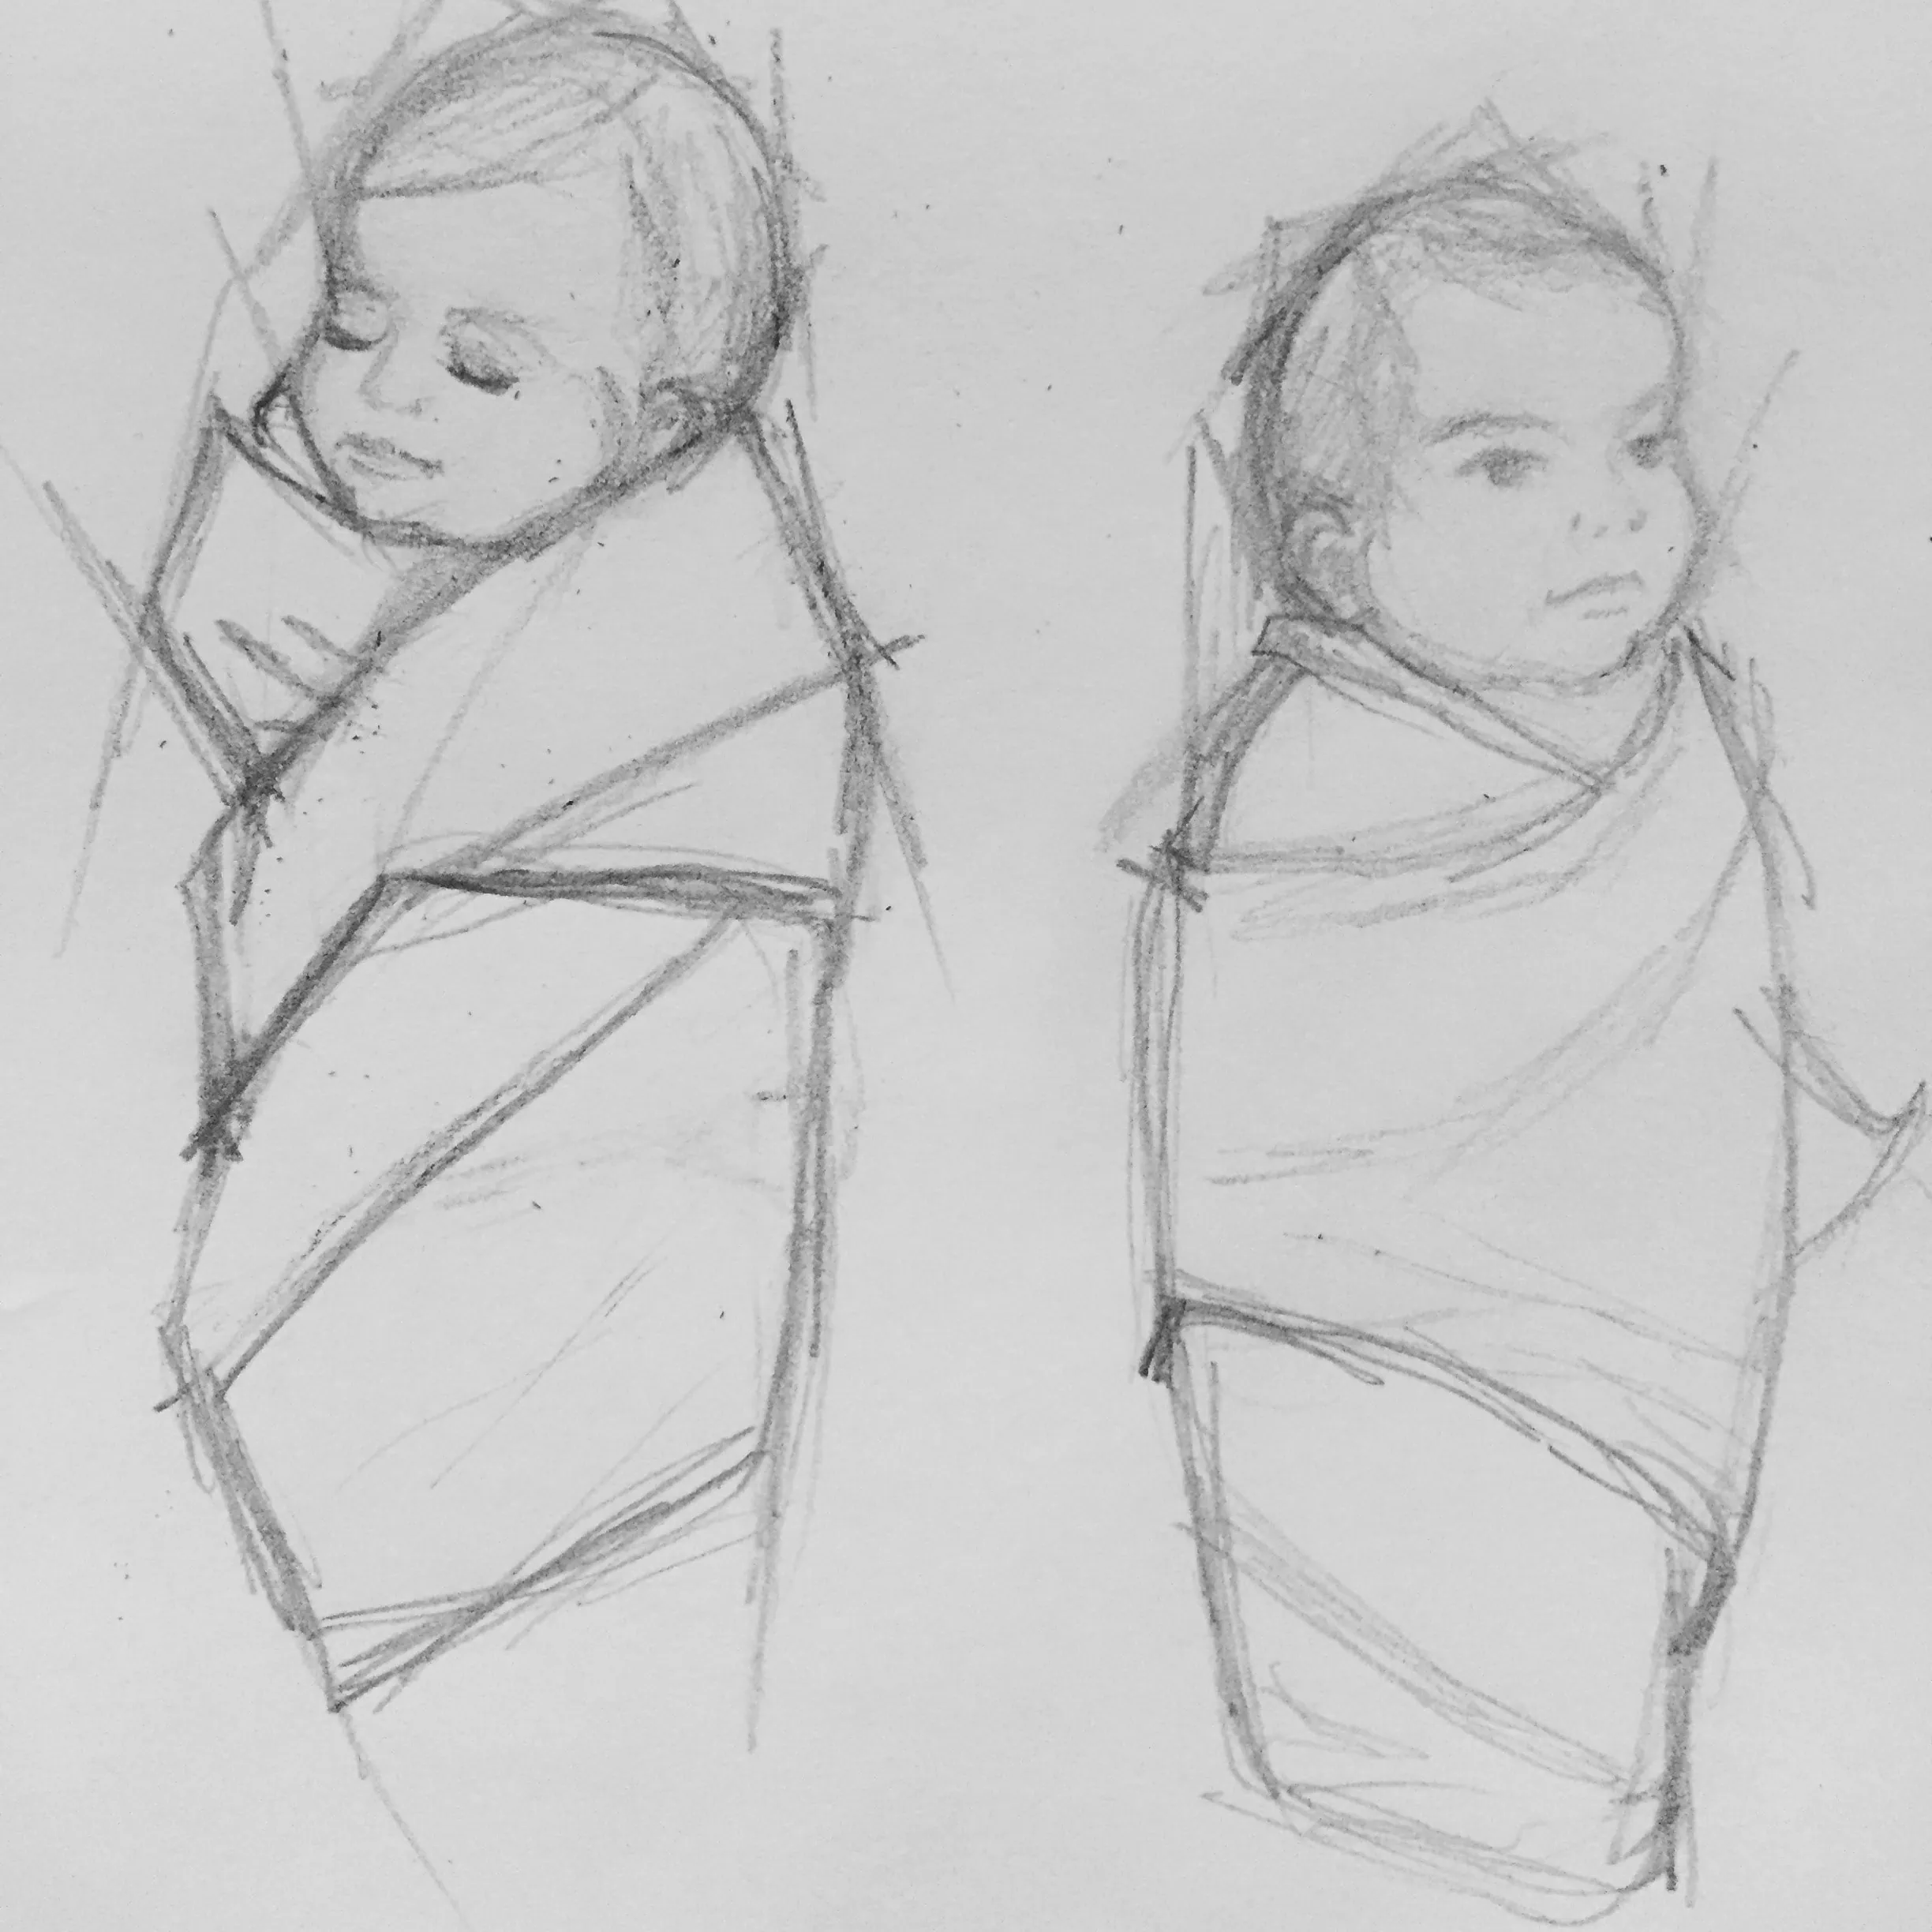  A sketch of babies swaddled in cloth. 